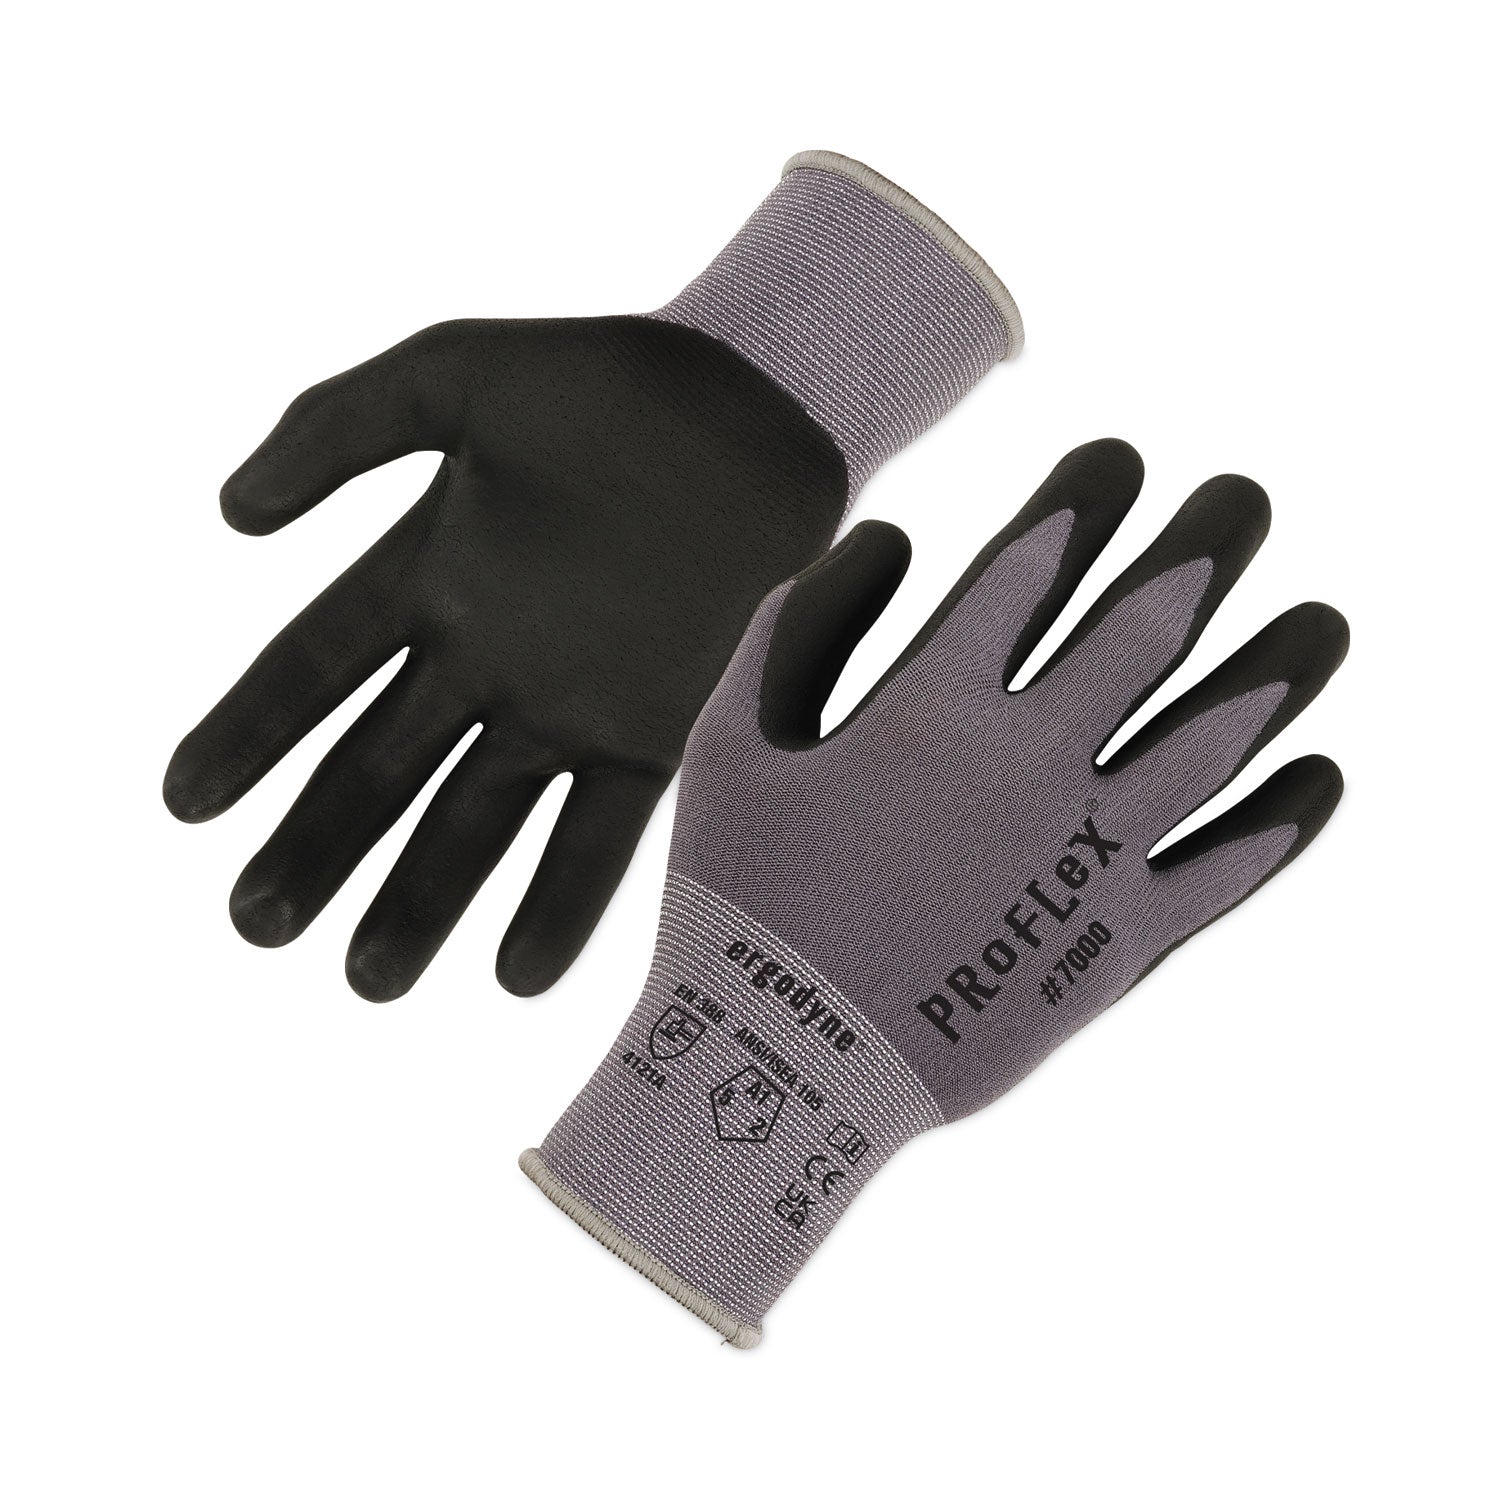 proflex-7000-nitrile-coated-gloves-microfoam-palm-gray-large-12-pairs-pack-ships-in-1-3-business-days_ego10364 - 1